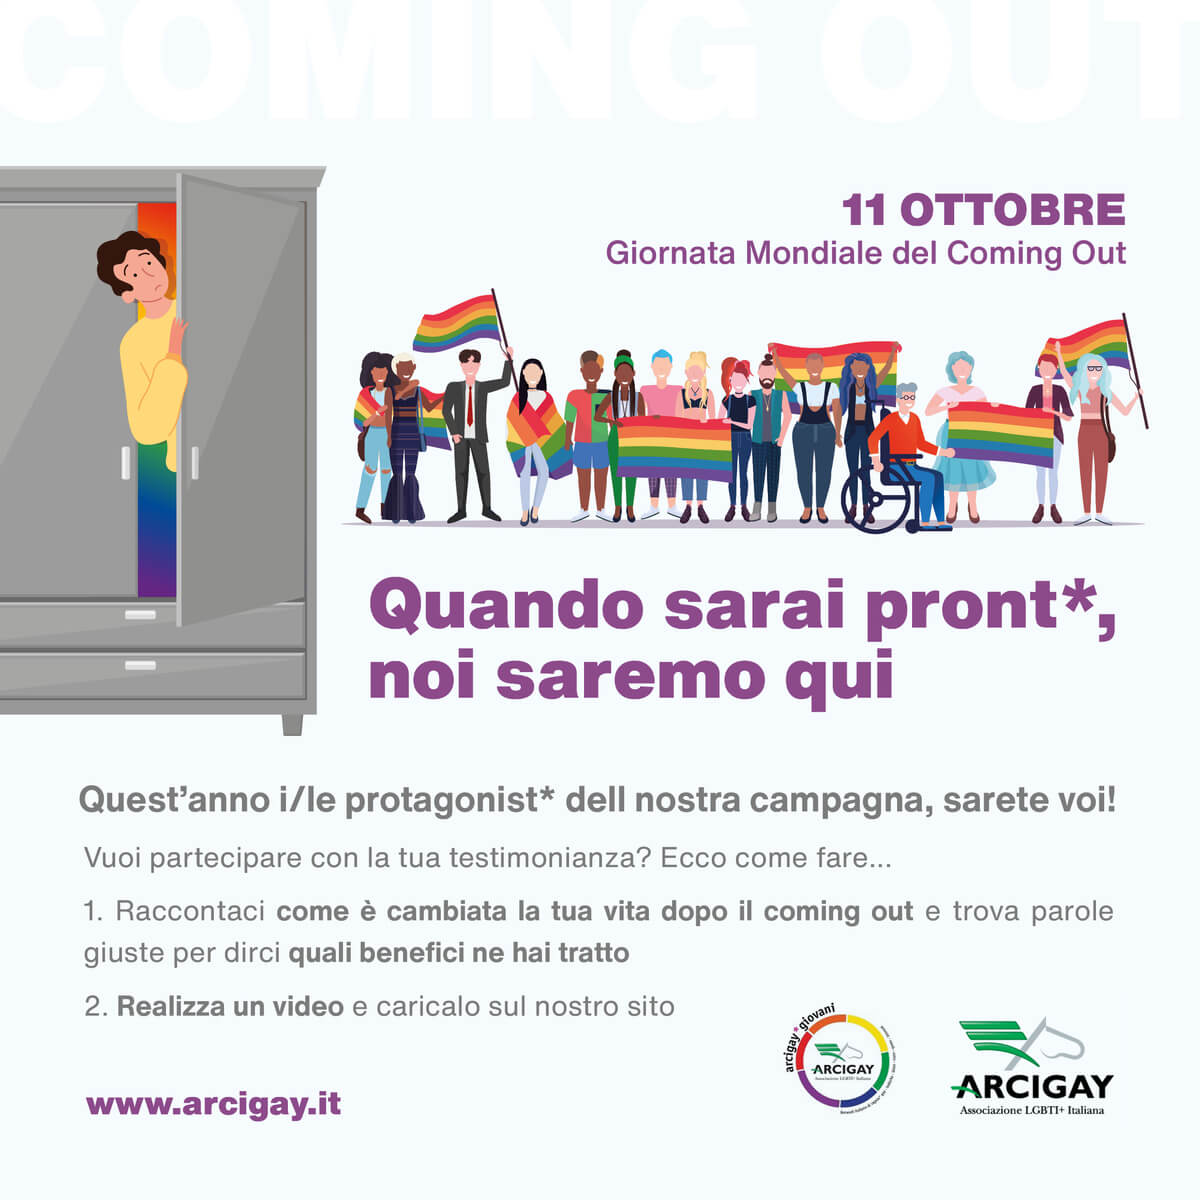 Coming Out Day 2020, la campagna Arcigay: "Quando sarai pront*, noi saremo qui" - video - Coming Out Day 2020 - Gay.it